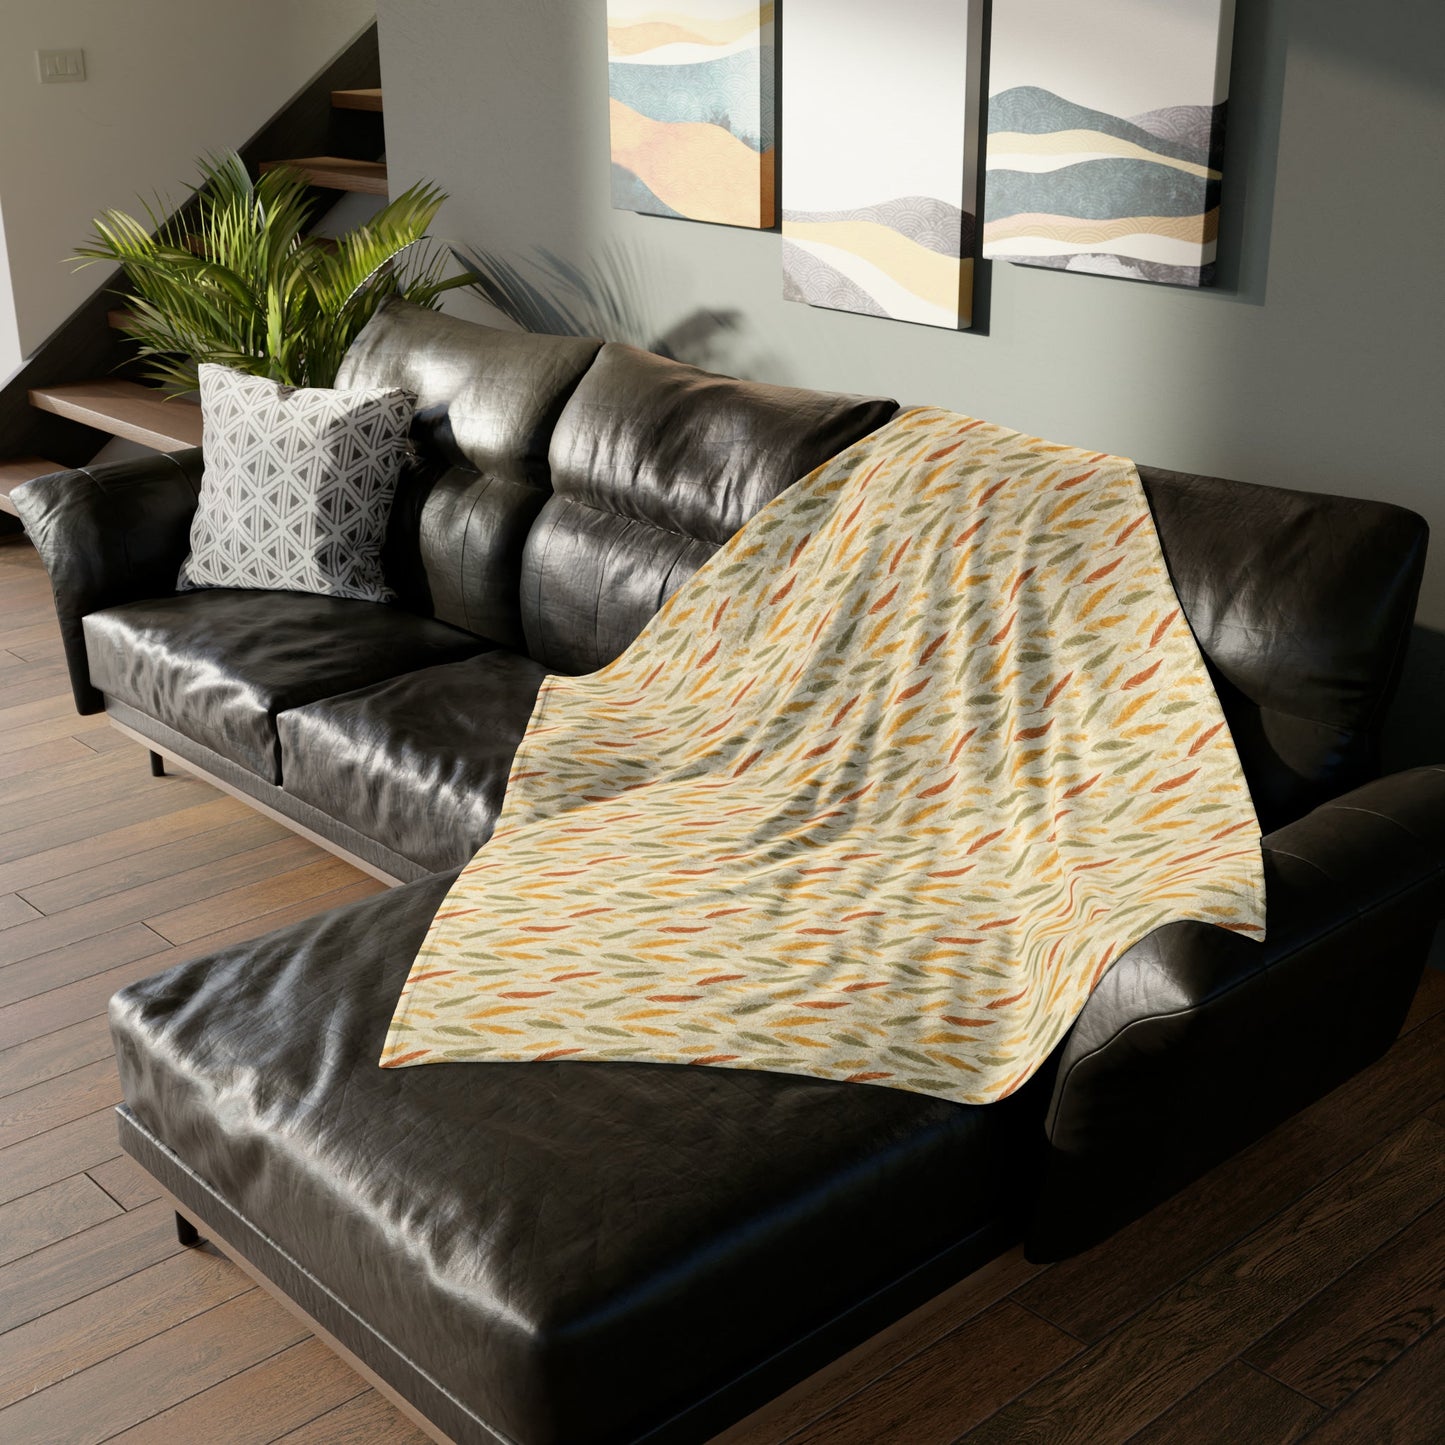 Feather-Woven Wheat Fields: A Naturecore Vision - The Ideal Throw for Sofas - Pattern Symphony